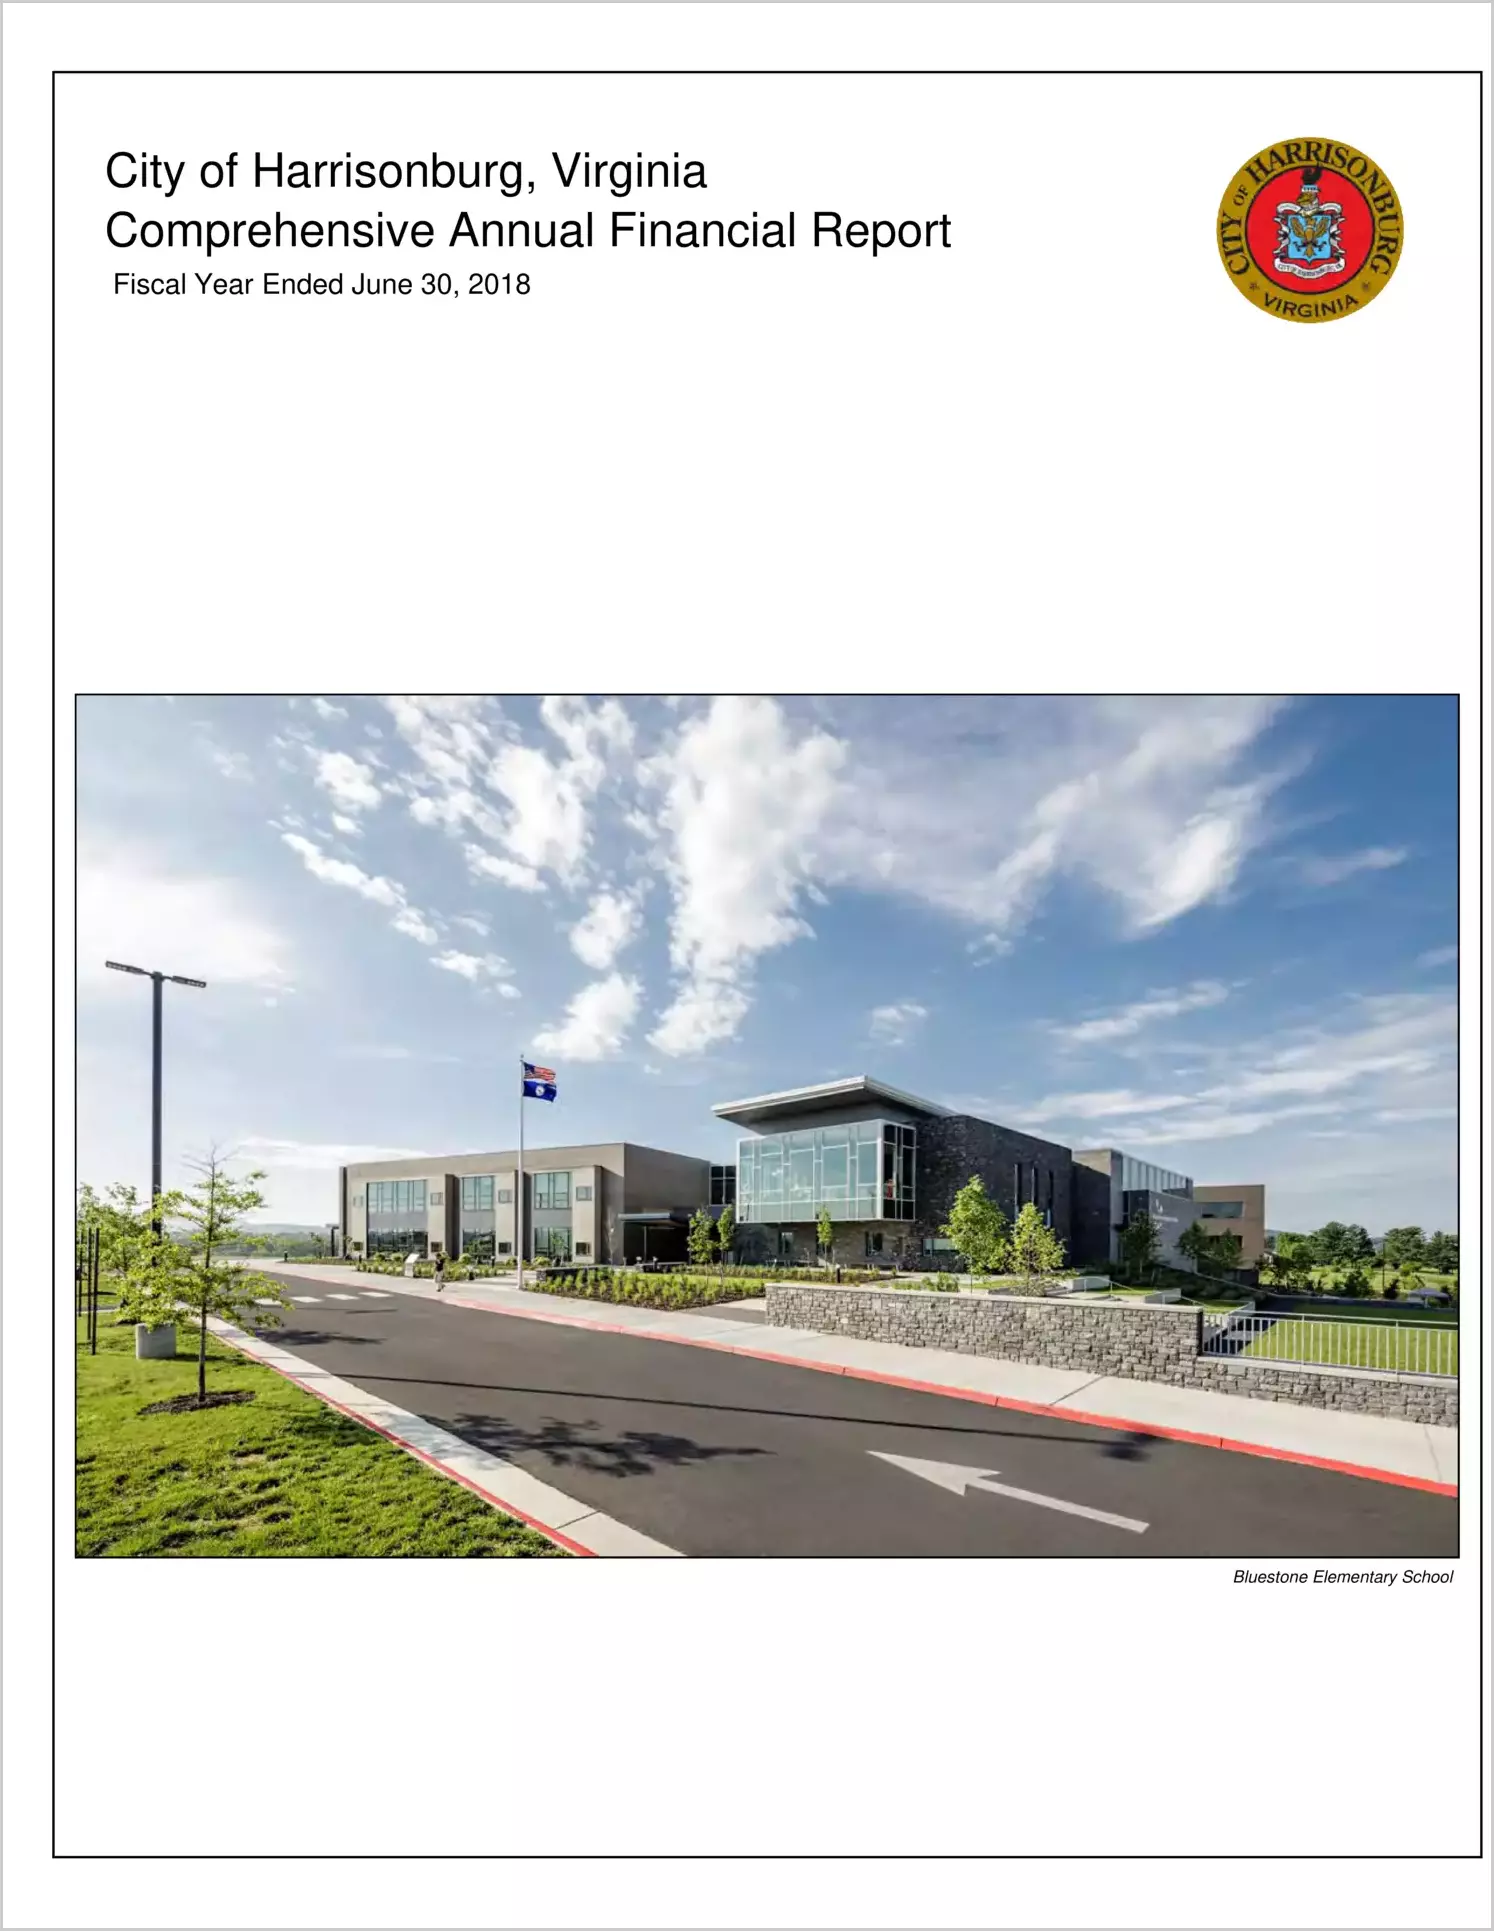 2018 Annual Financial Report for City of Harrisonburg